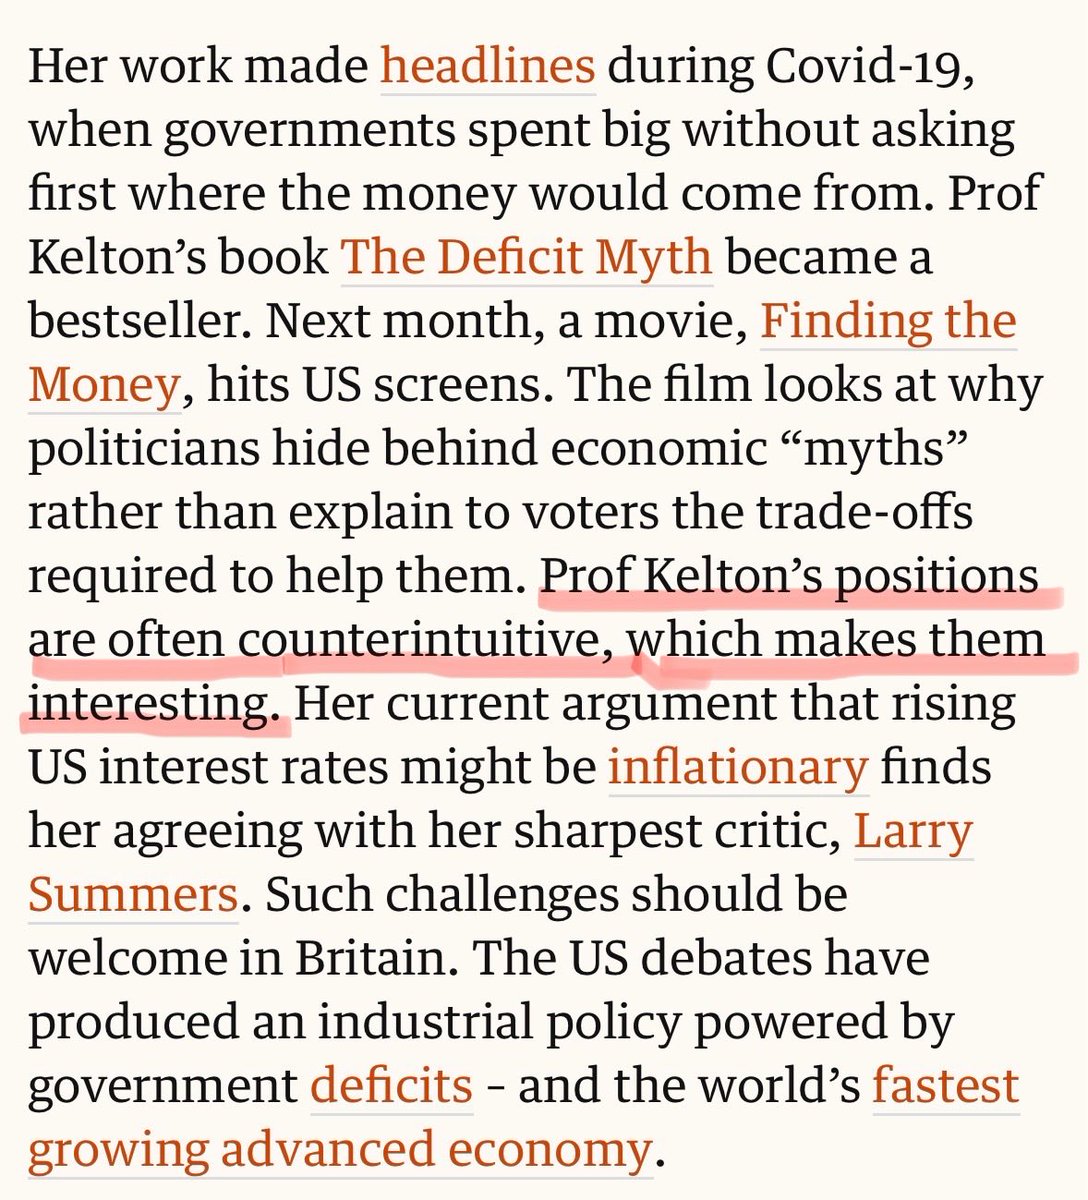 Guardian opinion piece on MMT accidentally lets slip the massive defect in their epistemology.